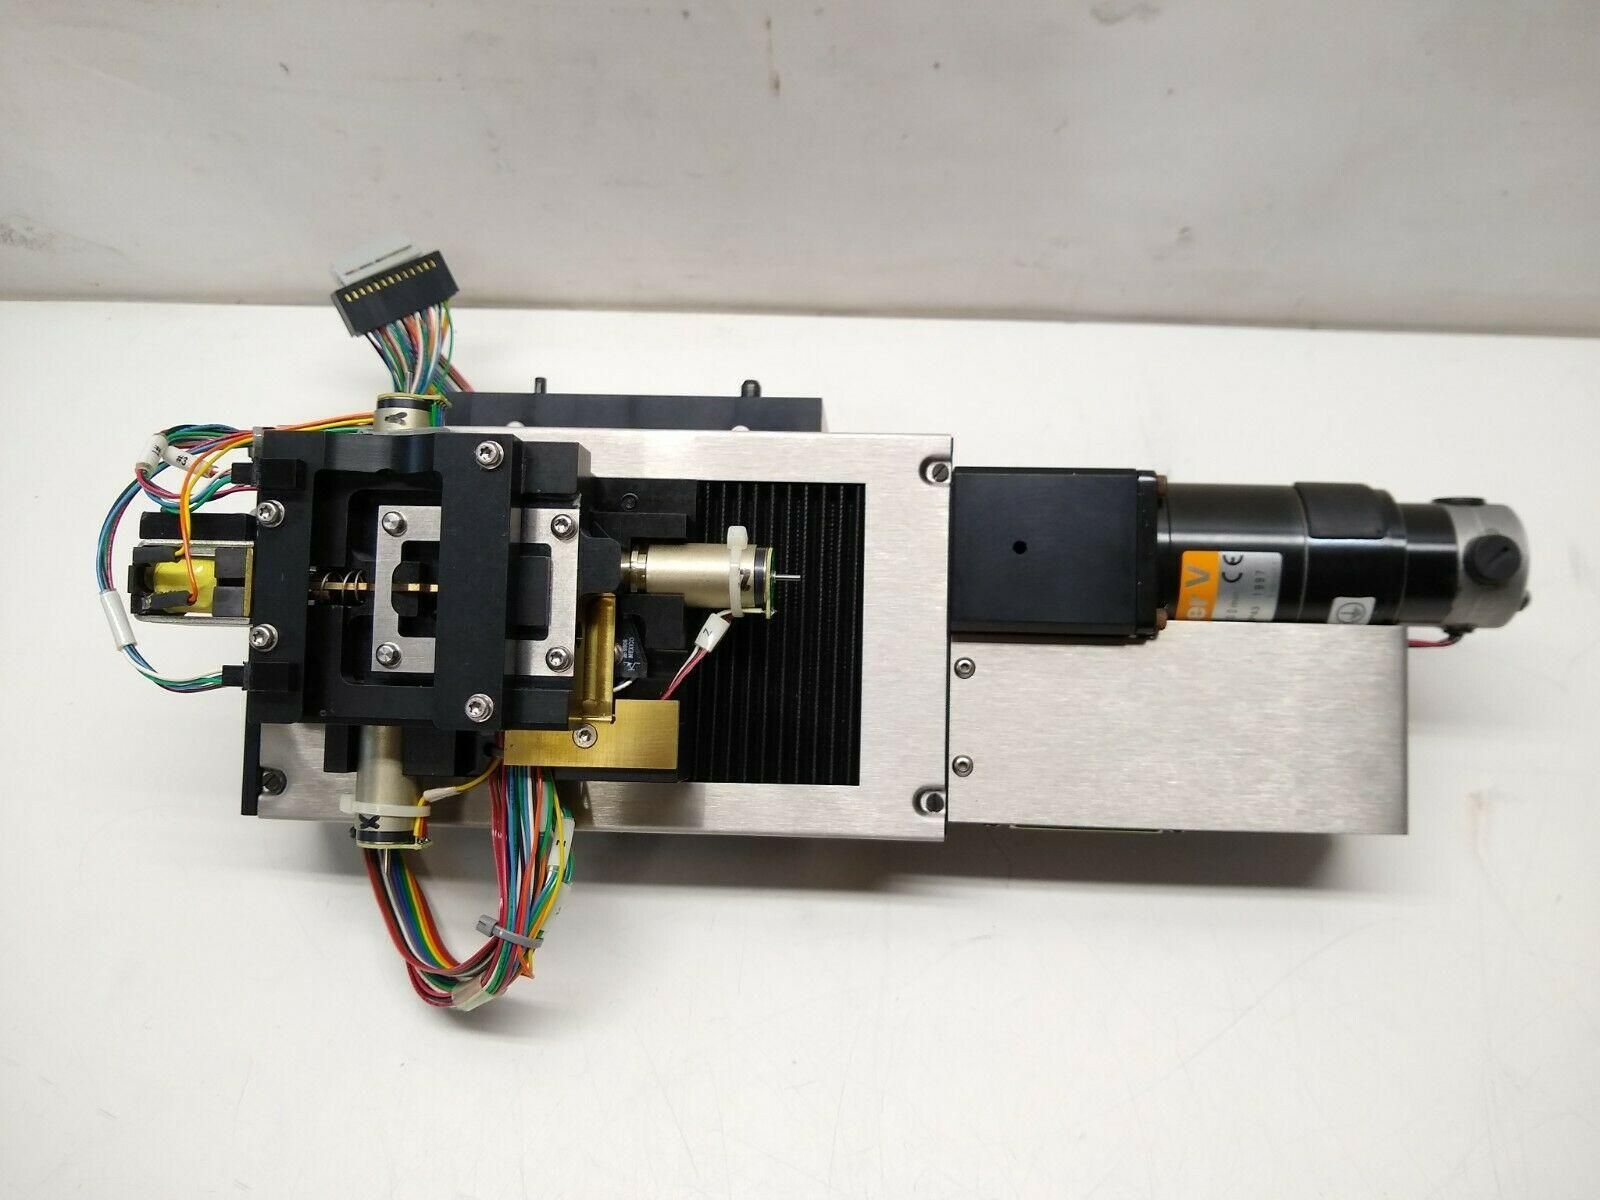 Newport Z047A Linear Translation Stage Servo Actuator w/ Encoder and Mount